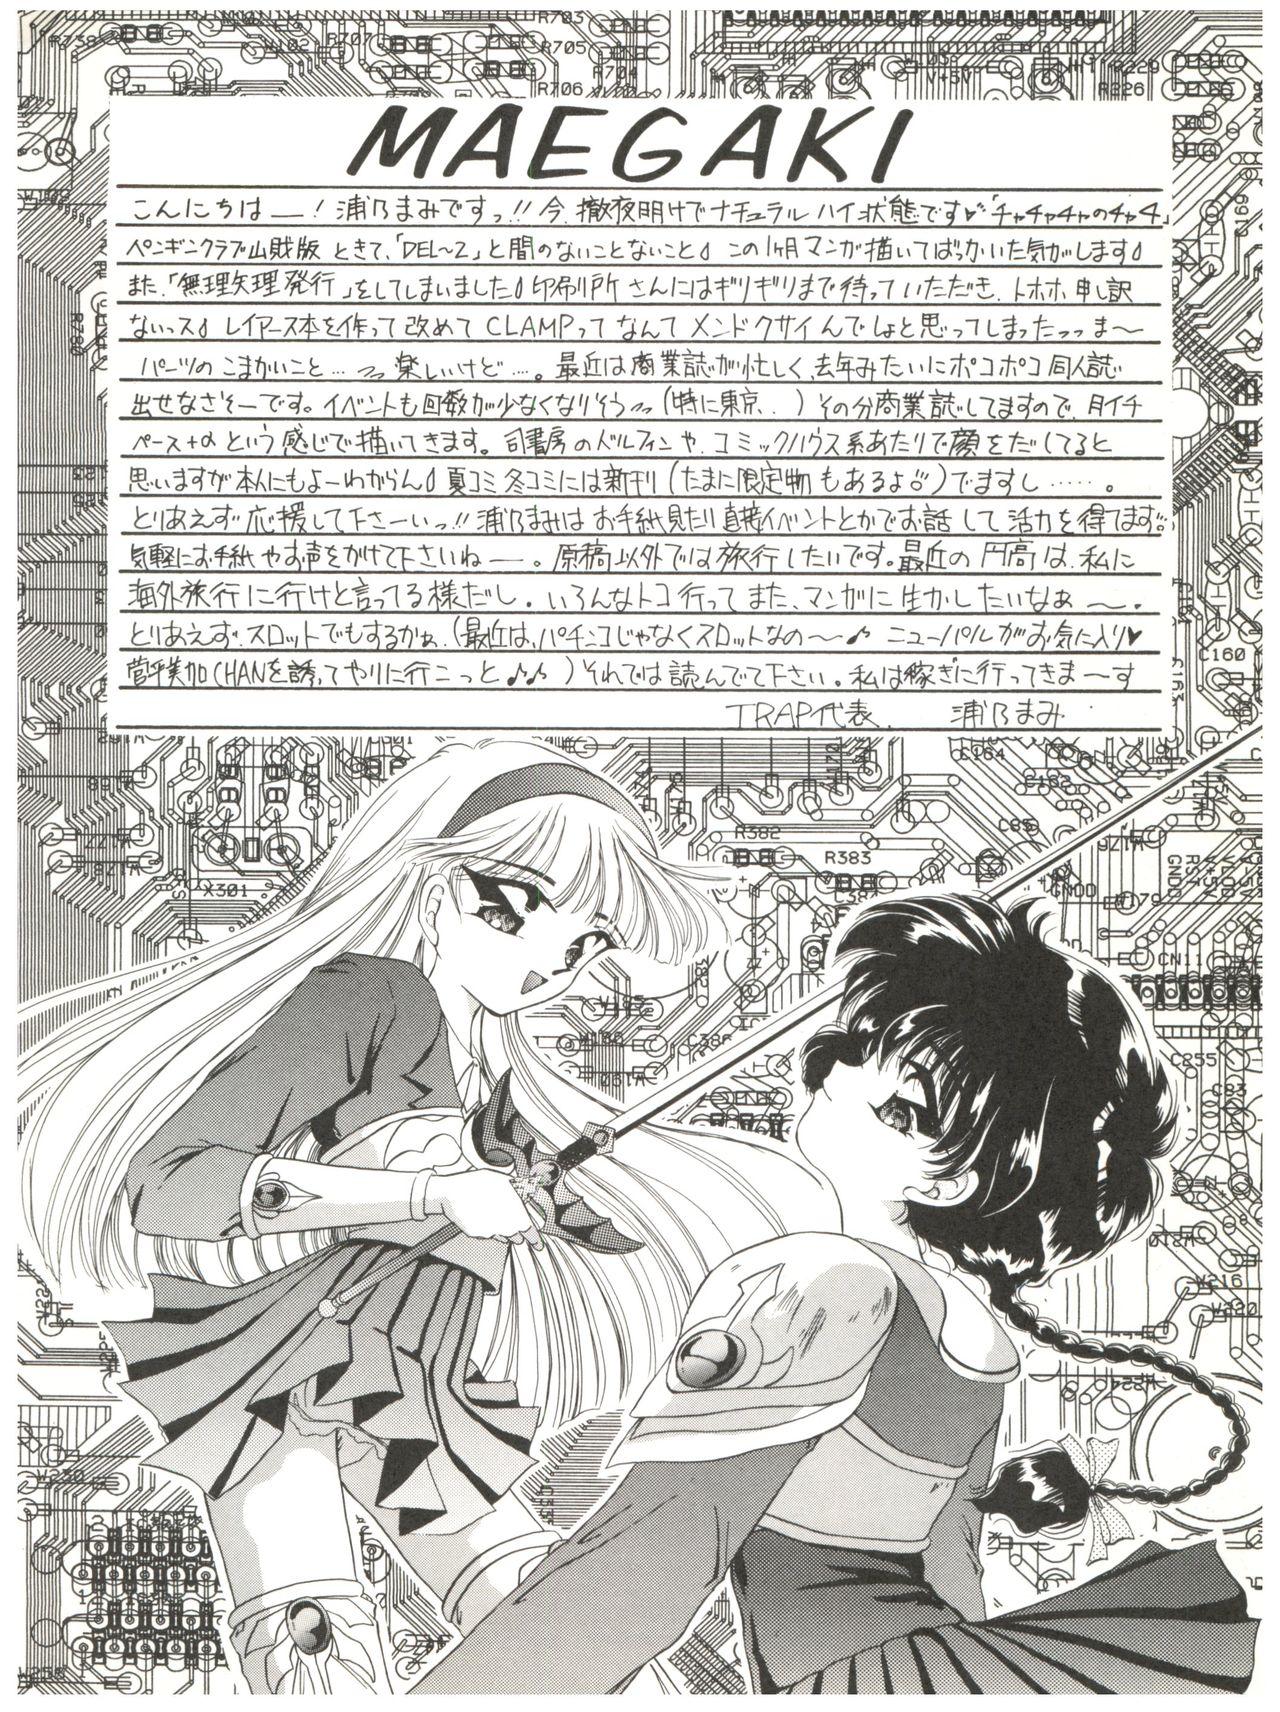 Rough Sex DELICIOUS 2nd STAGE - Magic knight rayearth Spank - Page 4